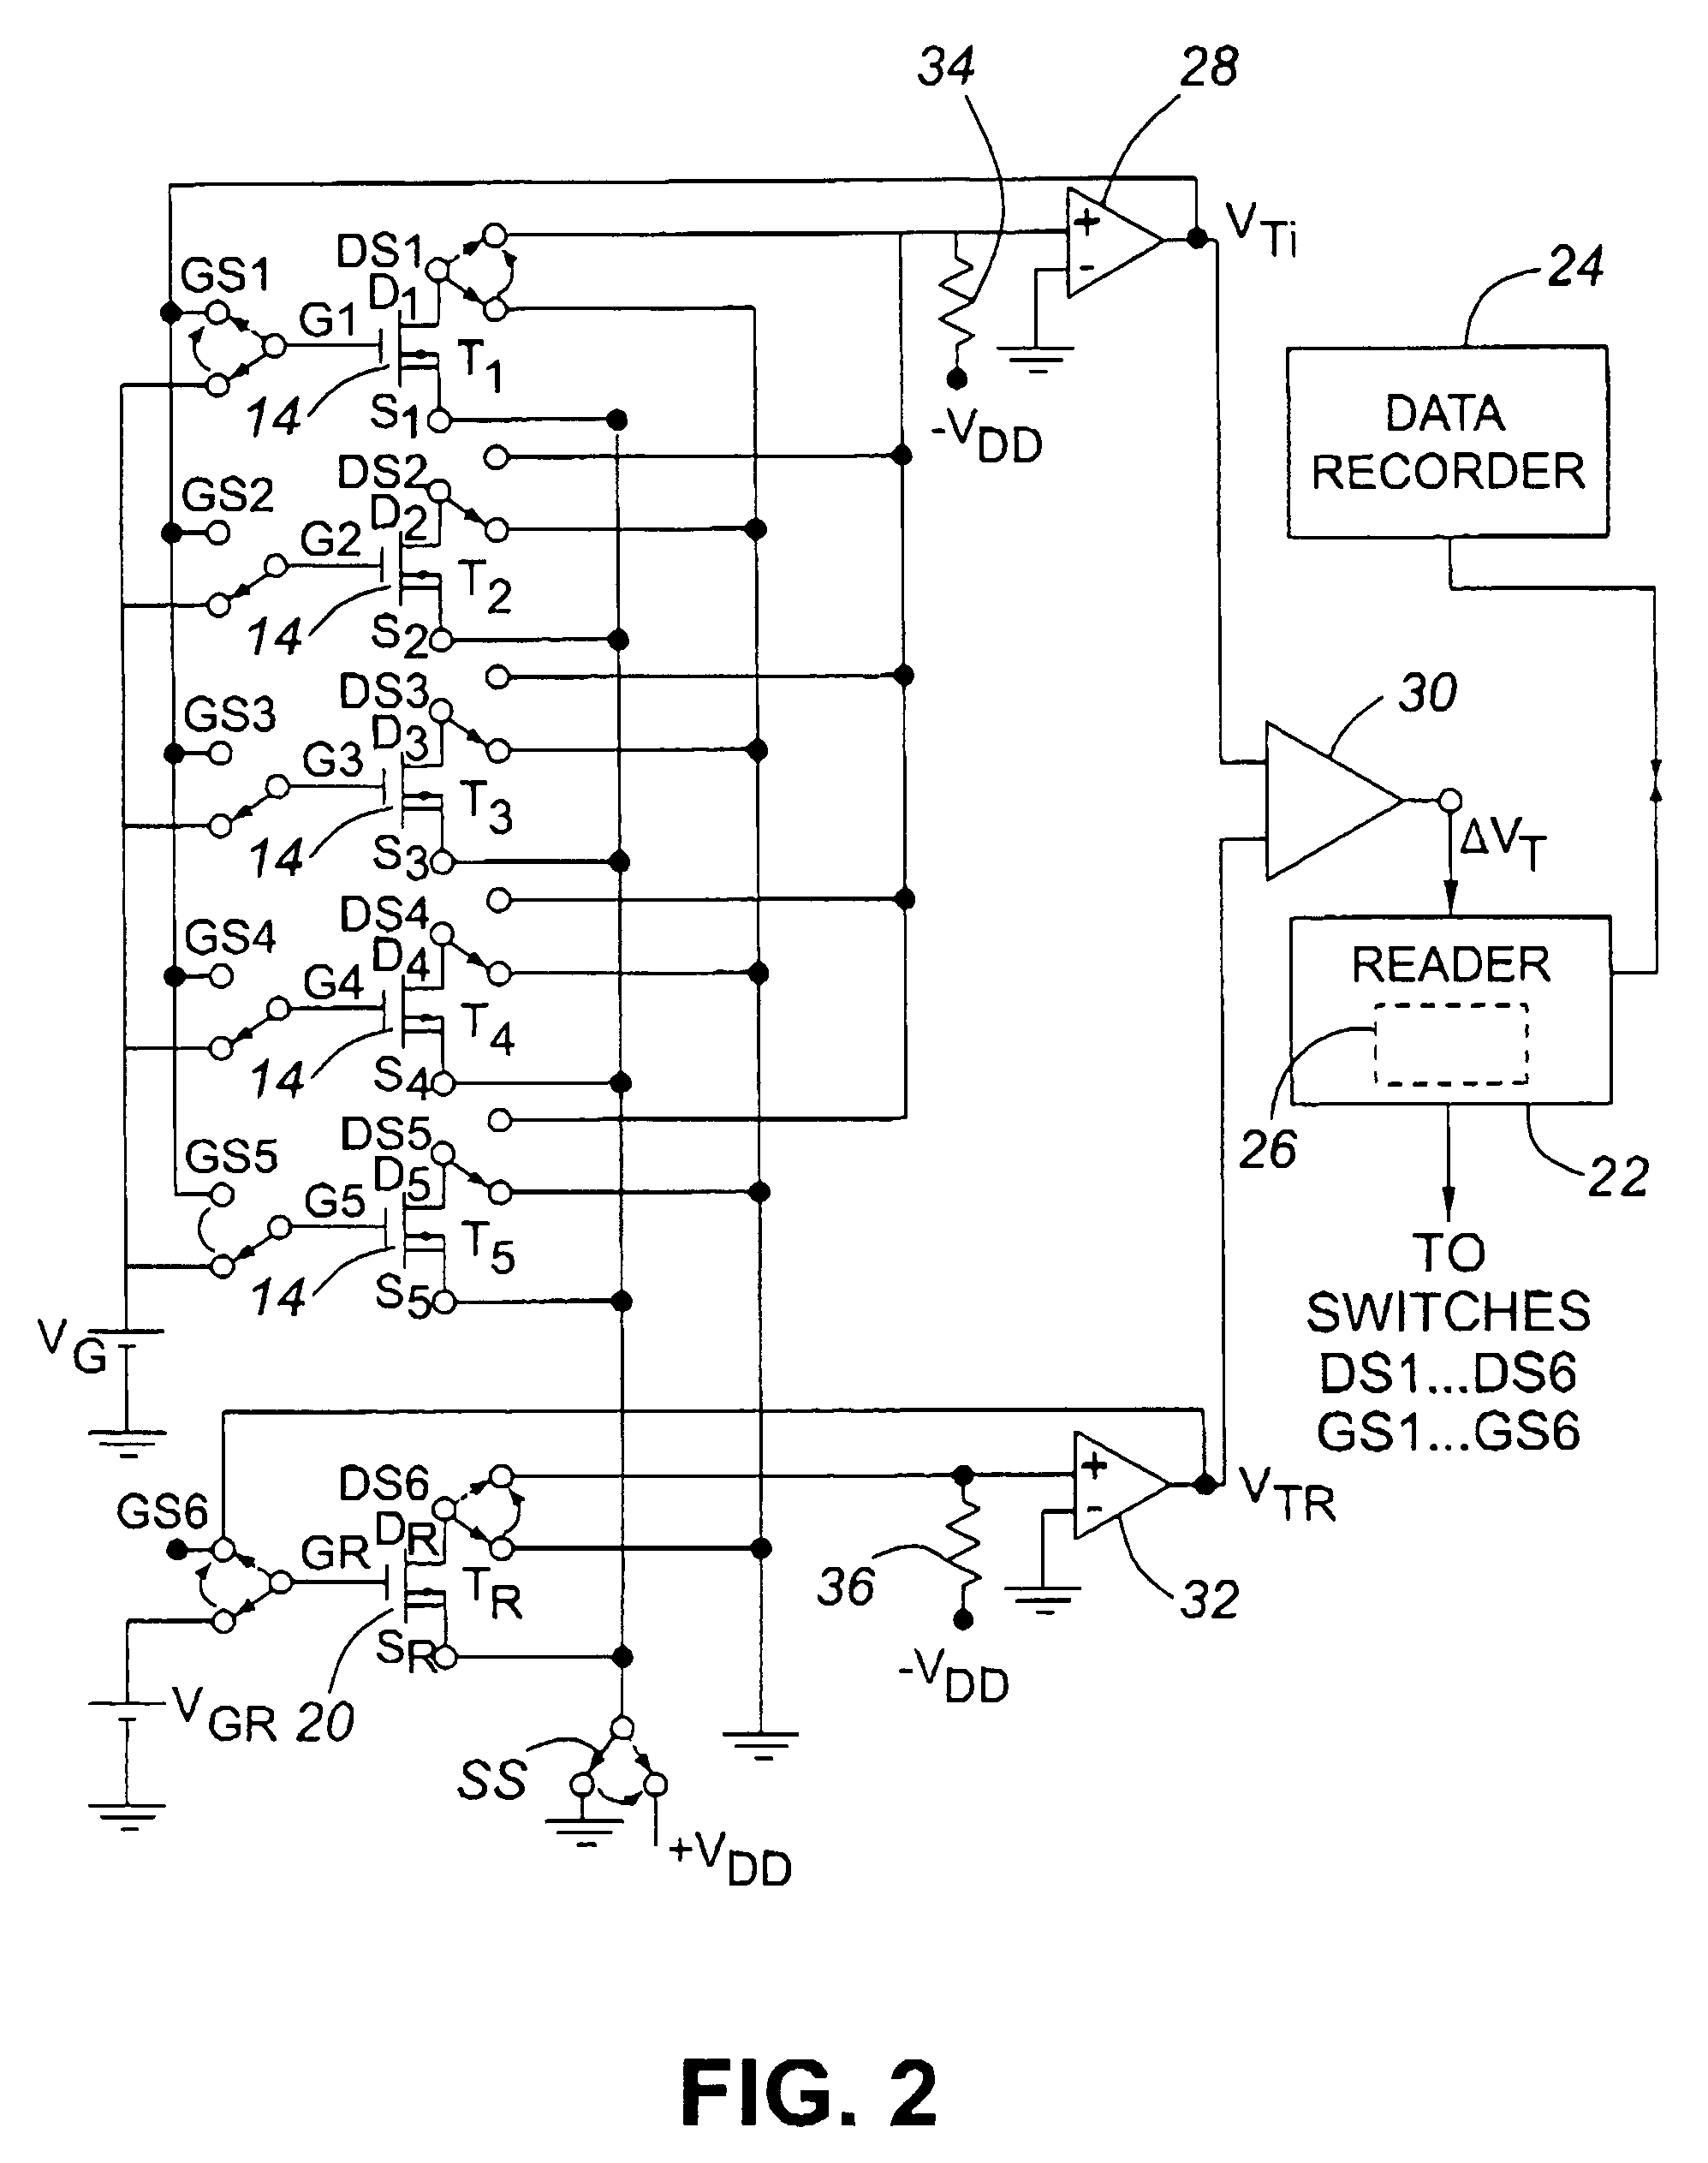 Dosimeter having an array of sensors for measuring ionizing radiation, and dosimetry system and method using such a dosimeter